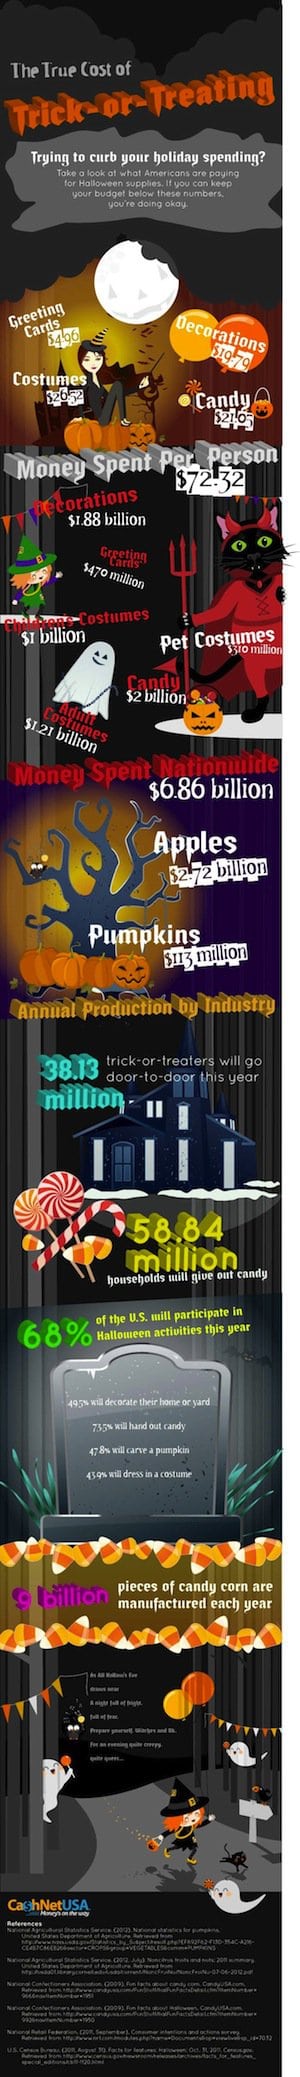 The True Cost of Trick or Treating–That Bag of Candy Adds Up!